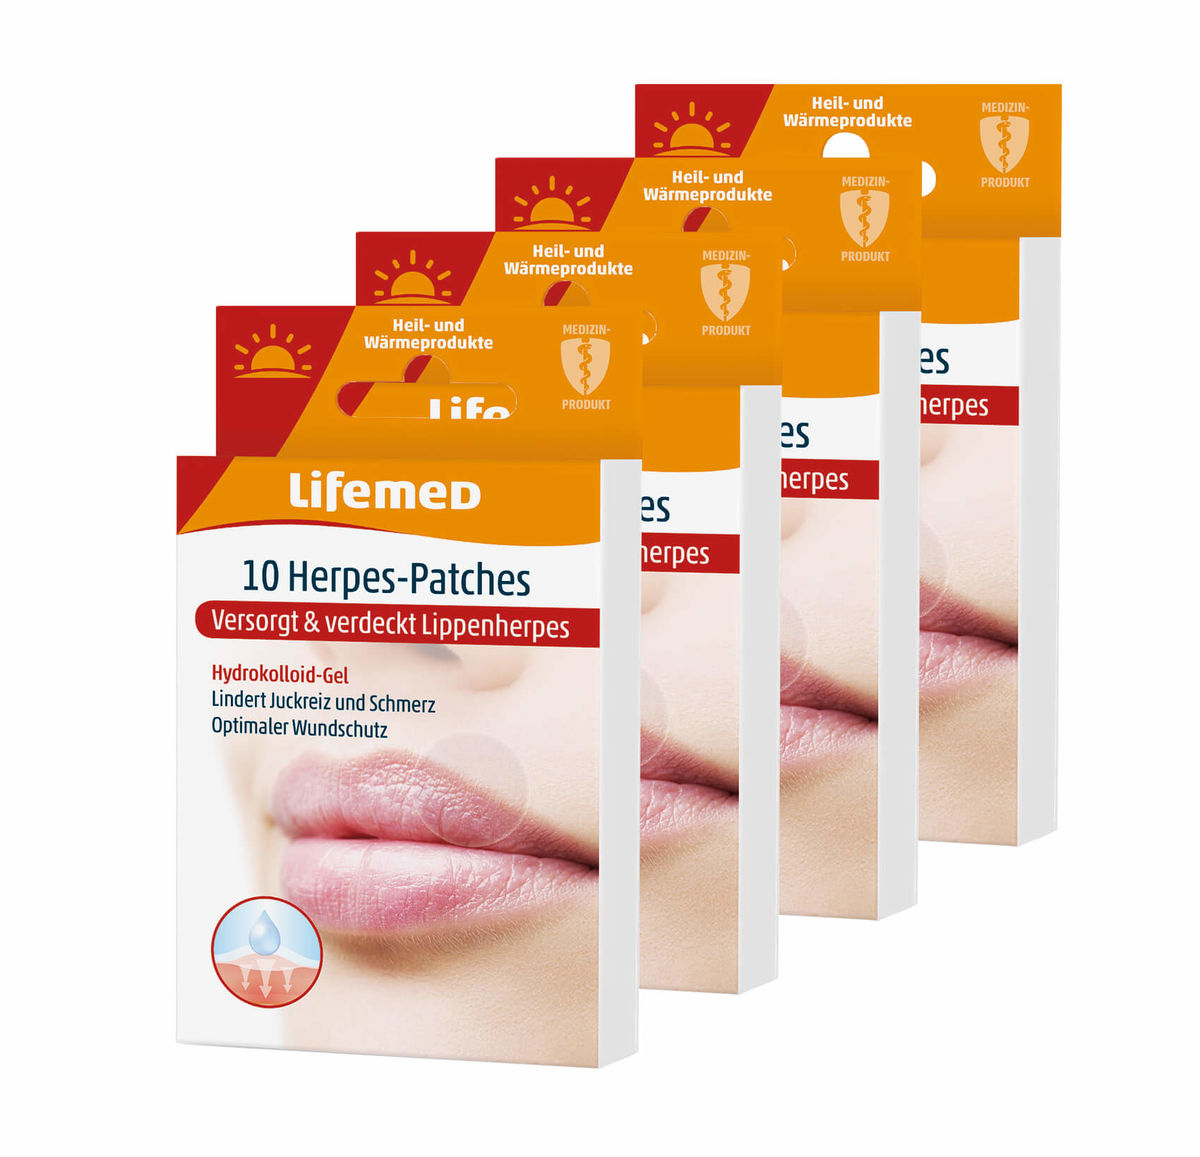 Image of Lifemed 40 Herpes-Patches, transparent bei nettoshop.ch